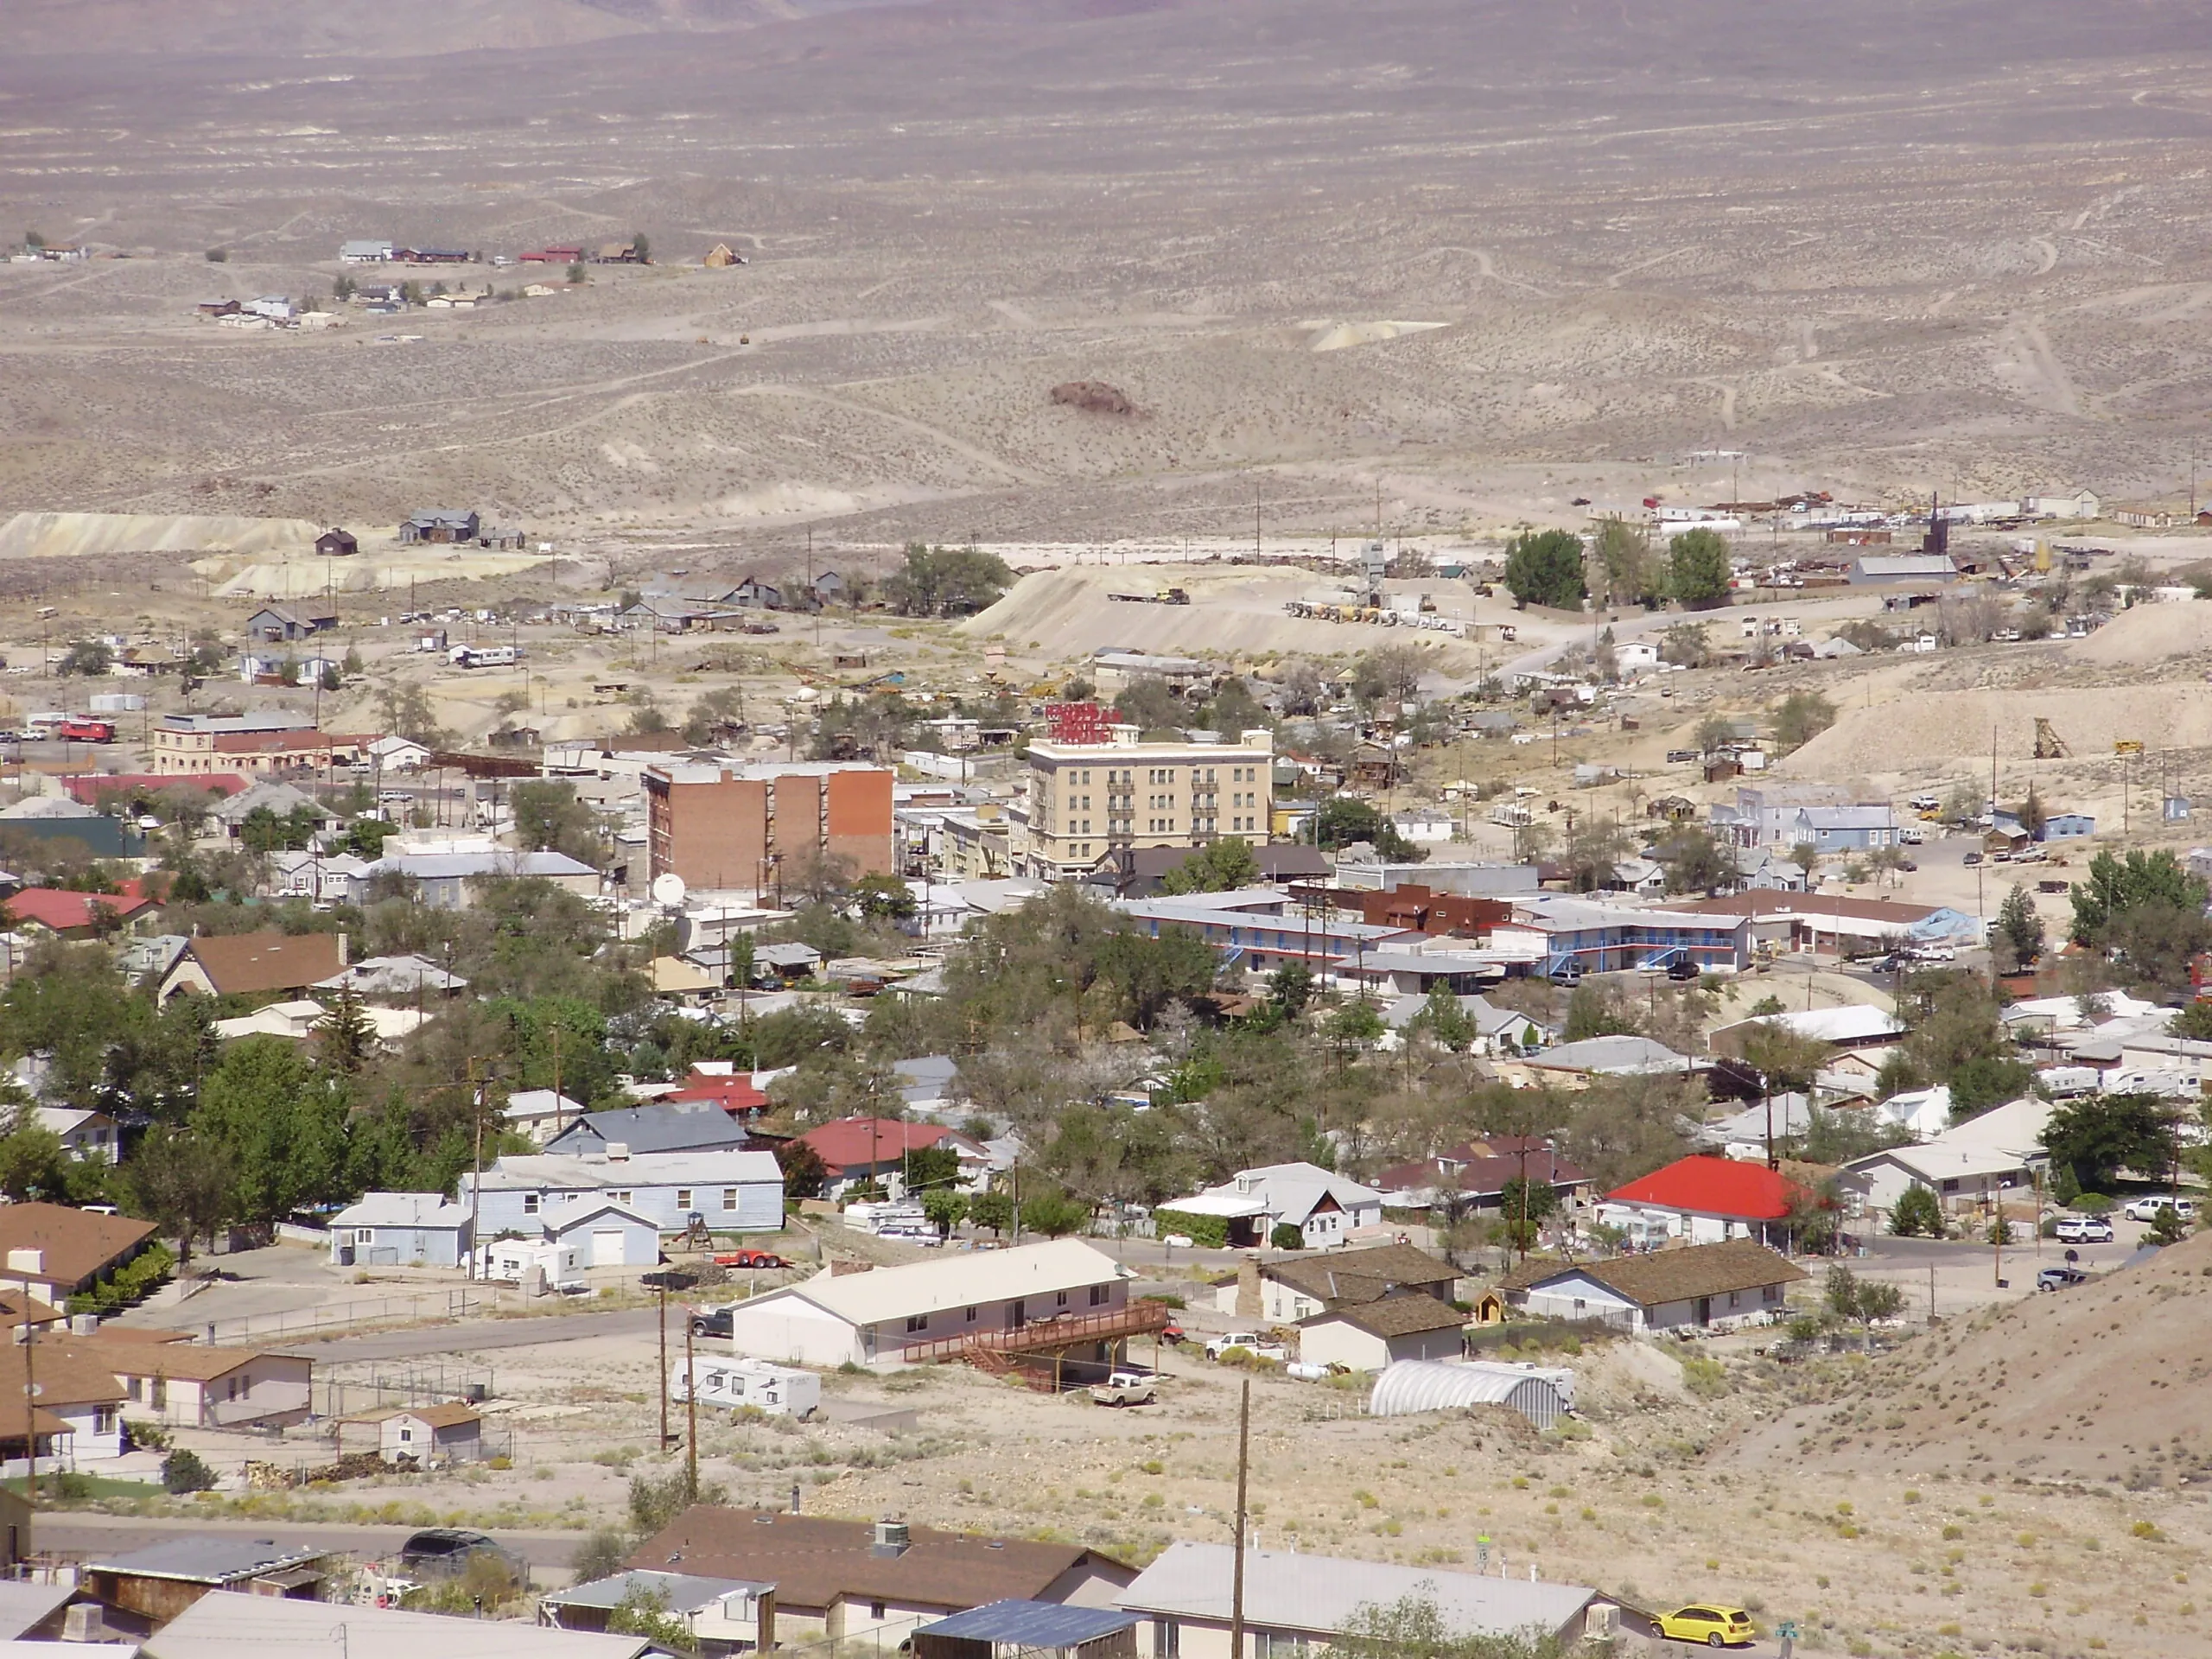 Tonopah bears the somber title of Nevada's poorest town